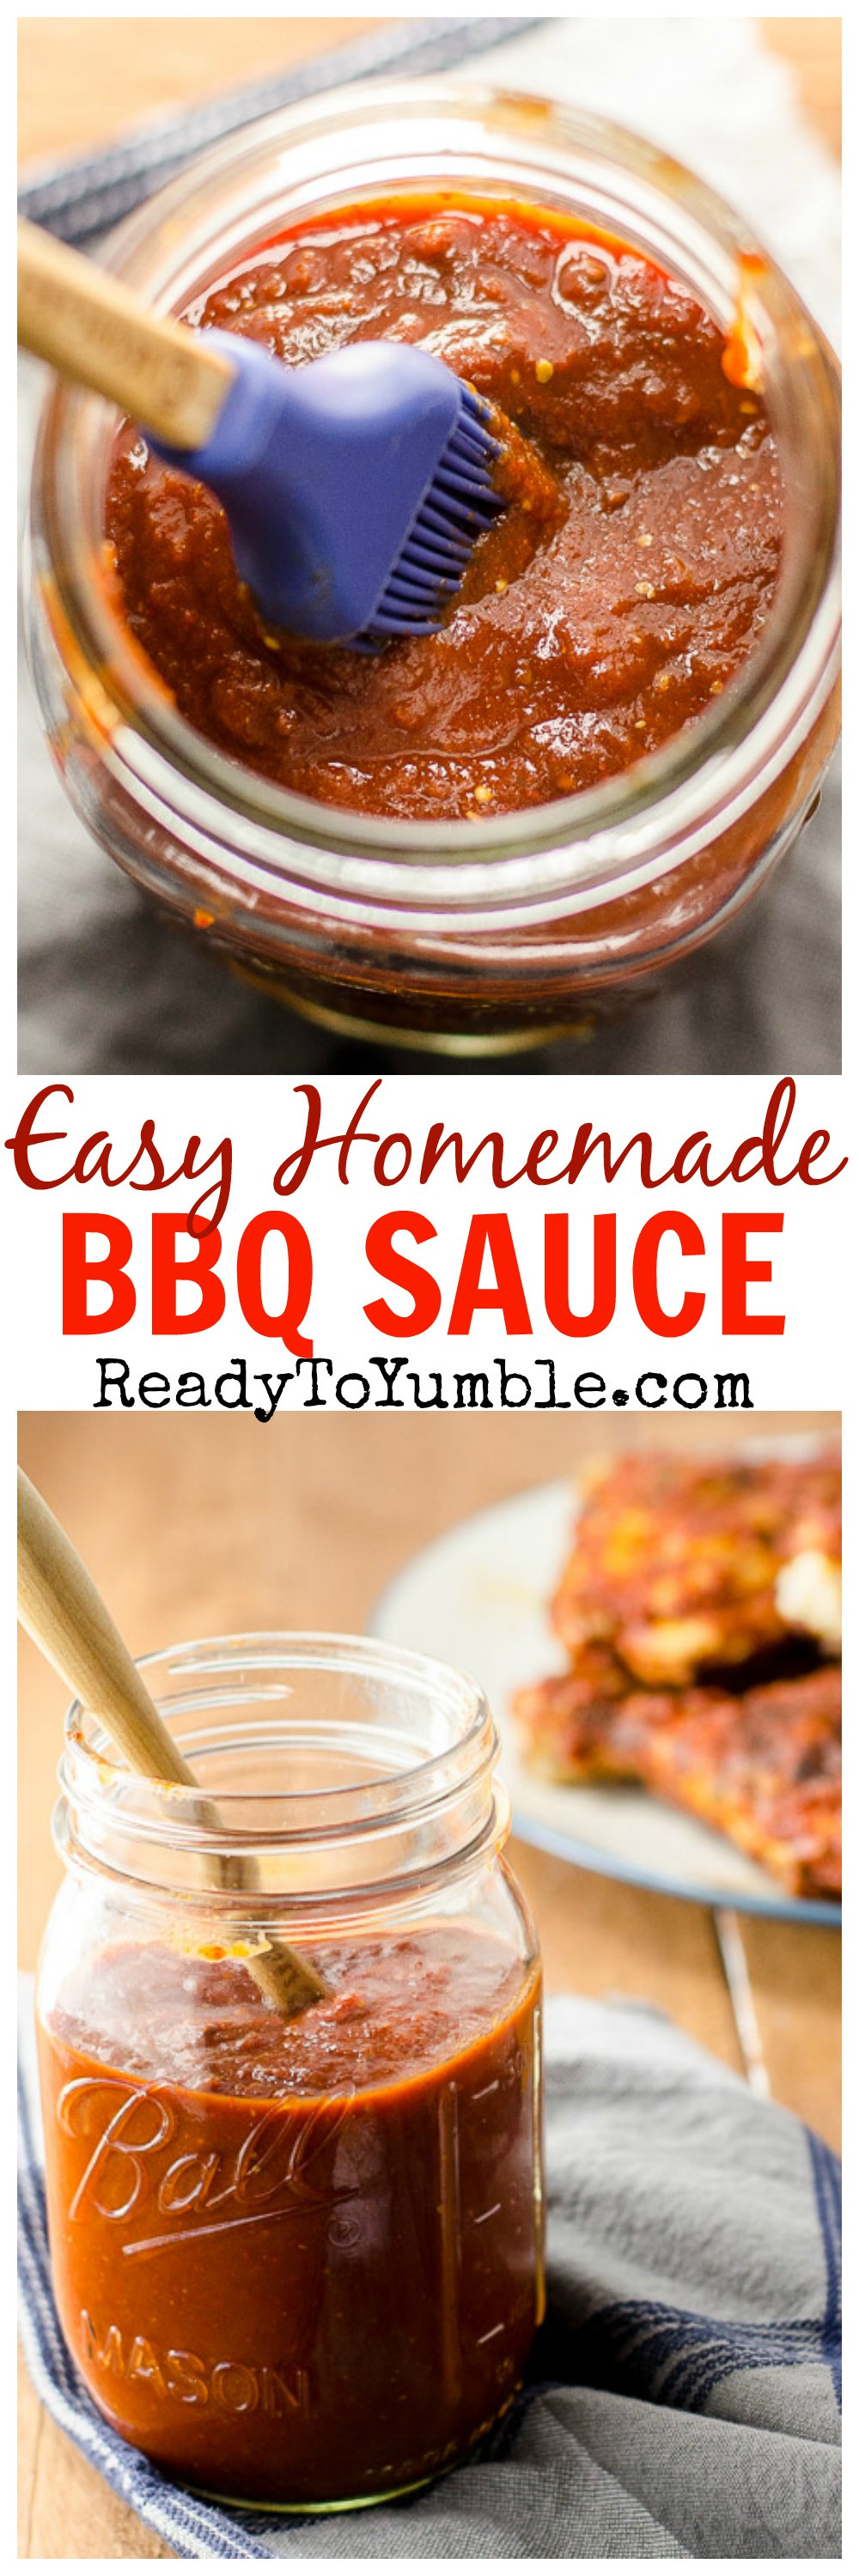 Easy Homemade Bbq Sauce
 Easy Homemade Barbecue Sauce Ready to Yumble